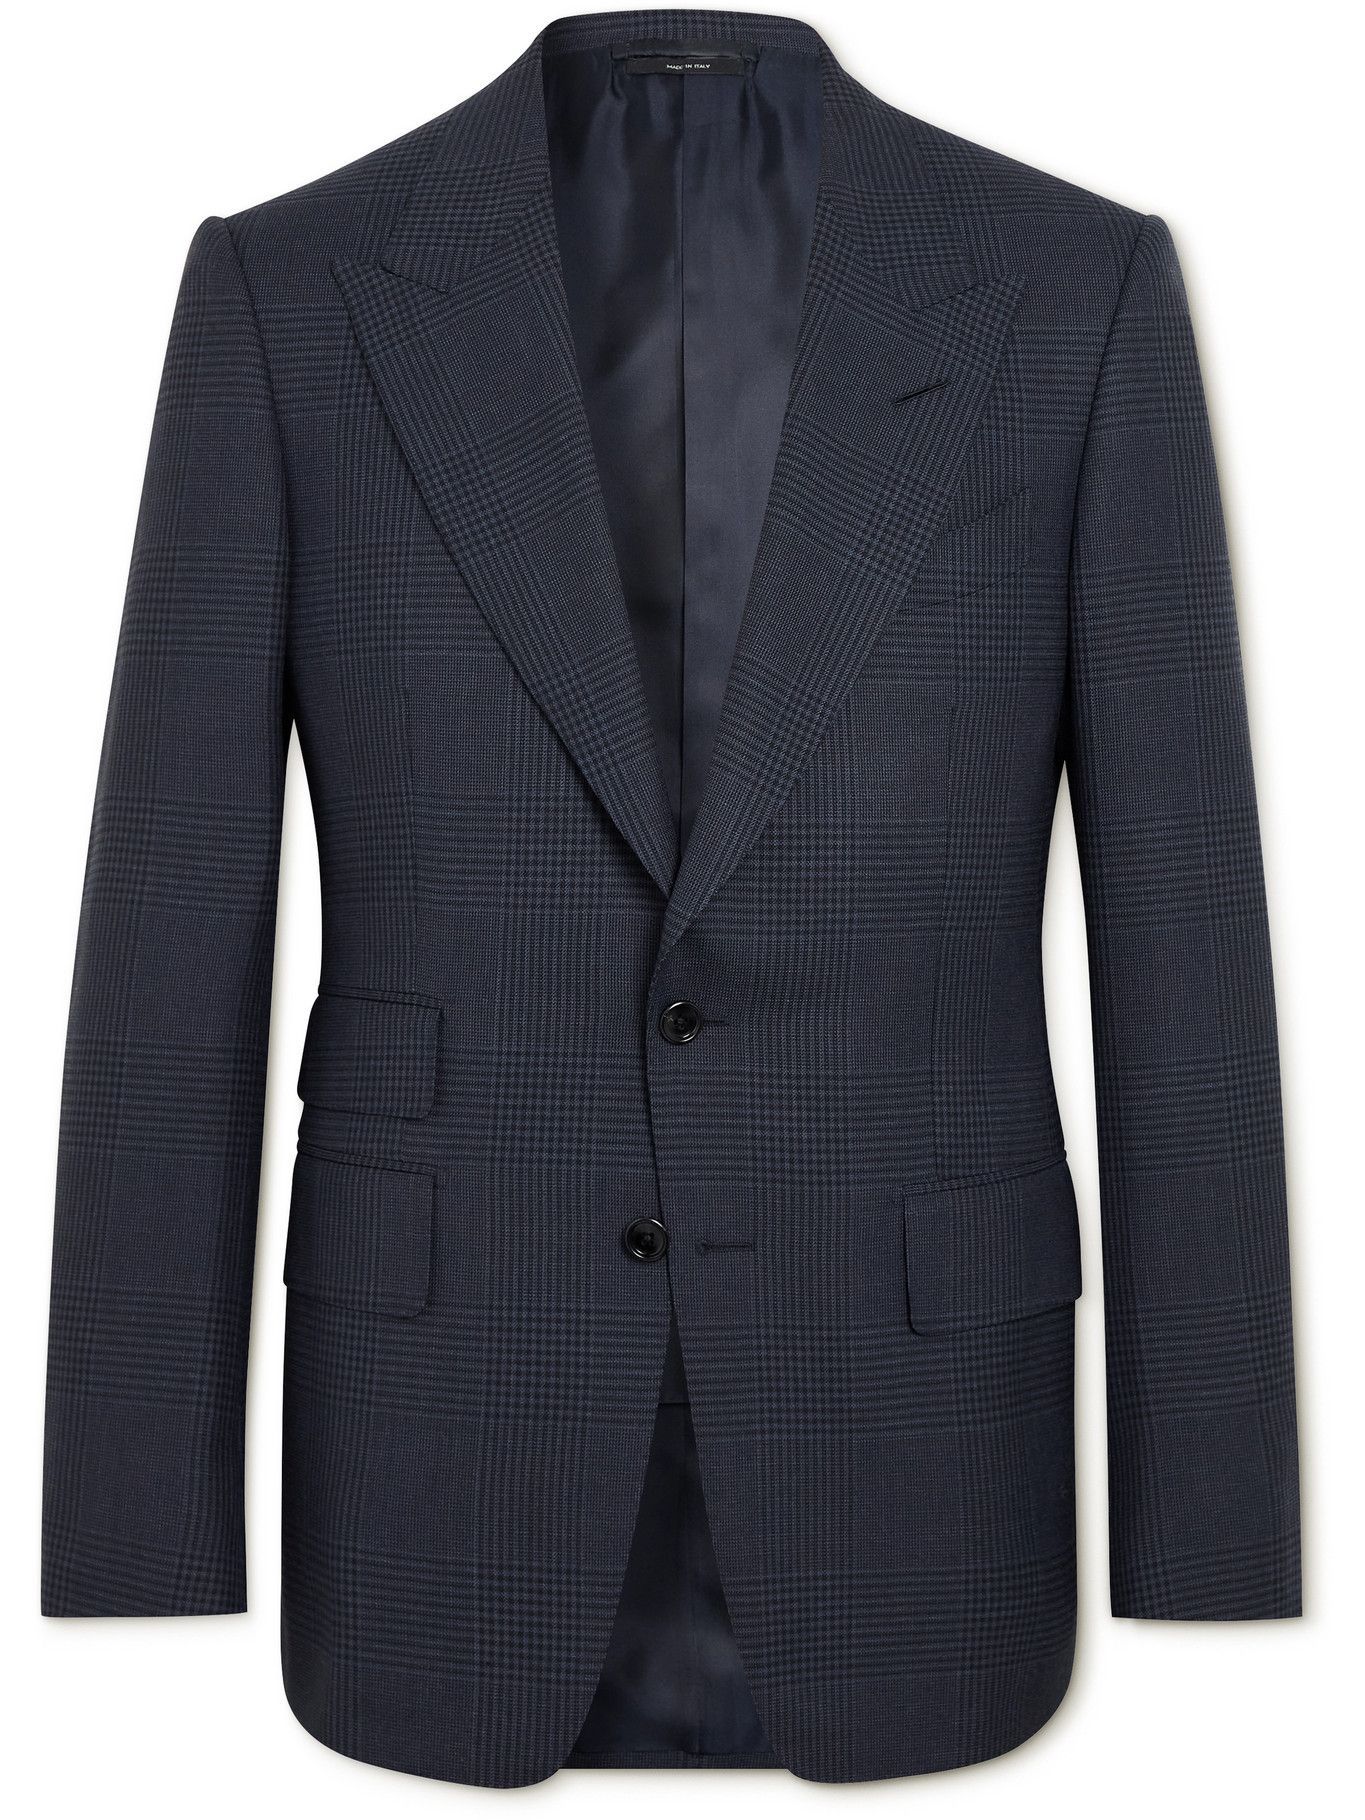 TOM FORD - Shelton Slim-Fit Prince of Wales Checked Wool and Silk-Blend Suit  Jacket - Blue TOM FORD